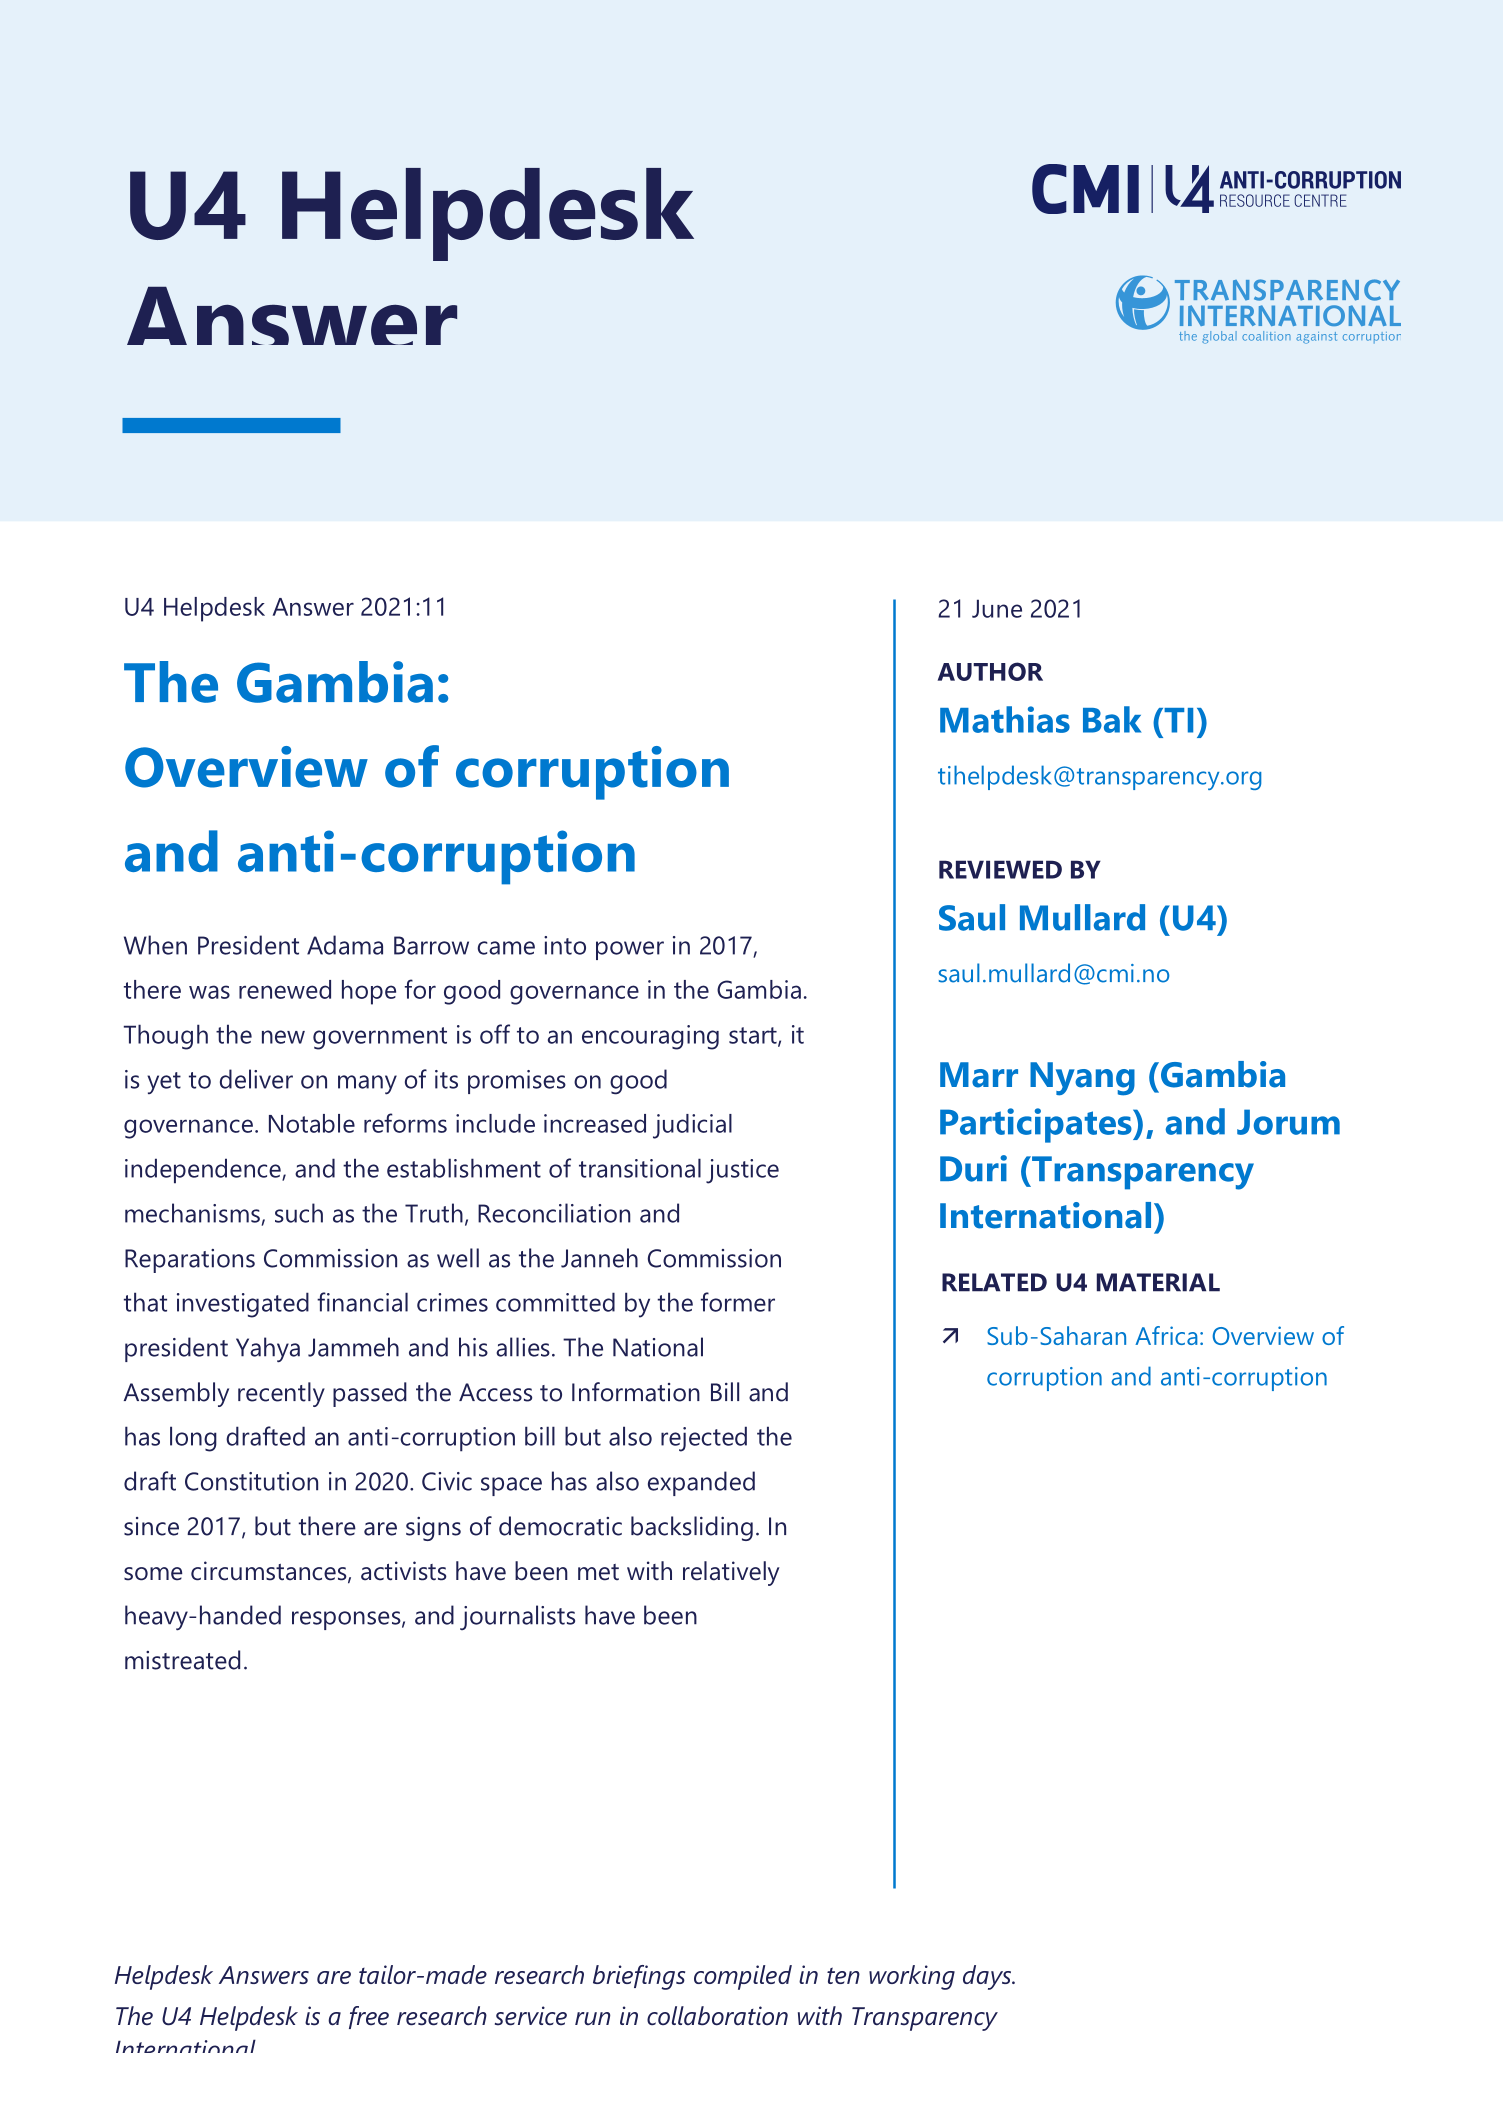 The Gambia:  Overview of corruption and anti-corruption